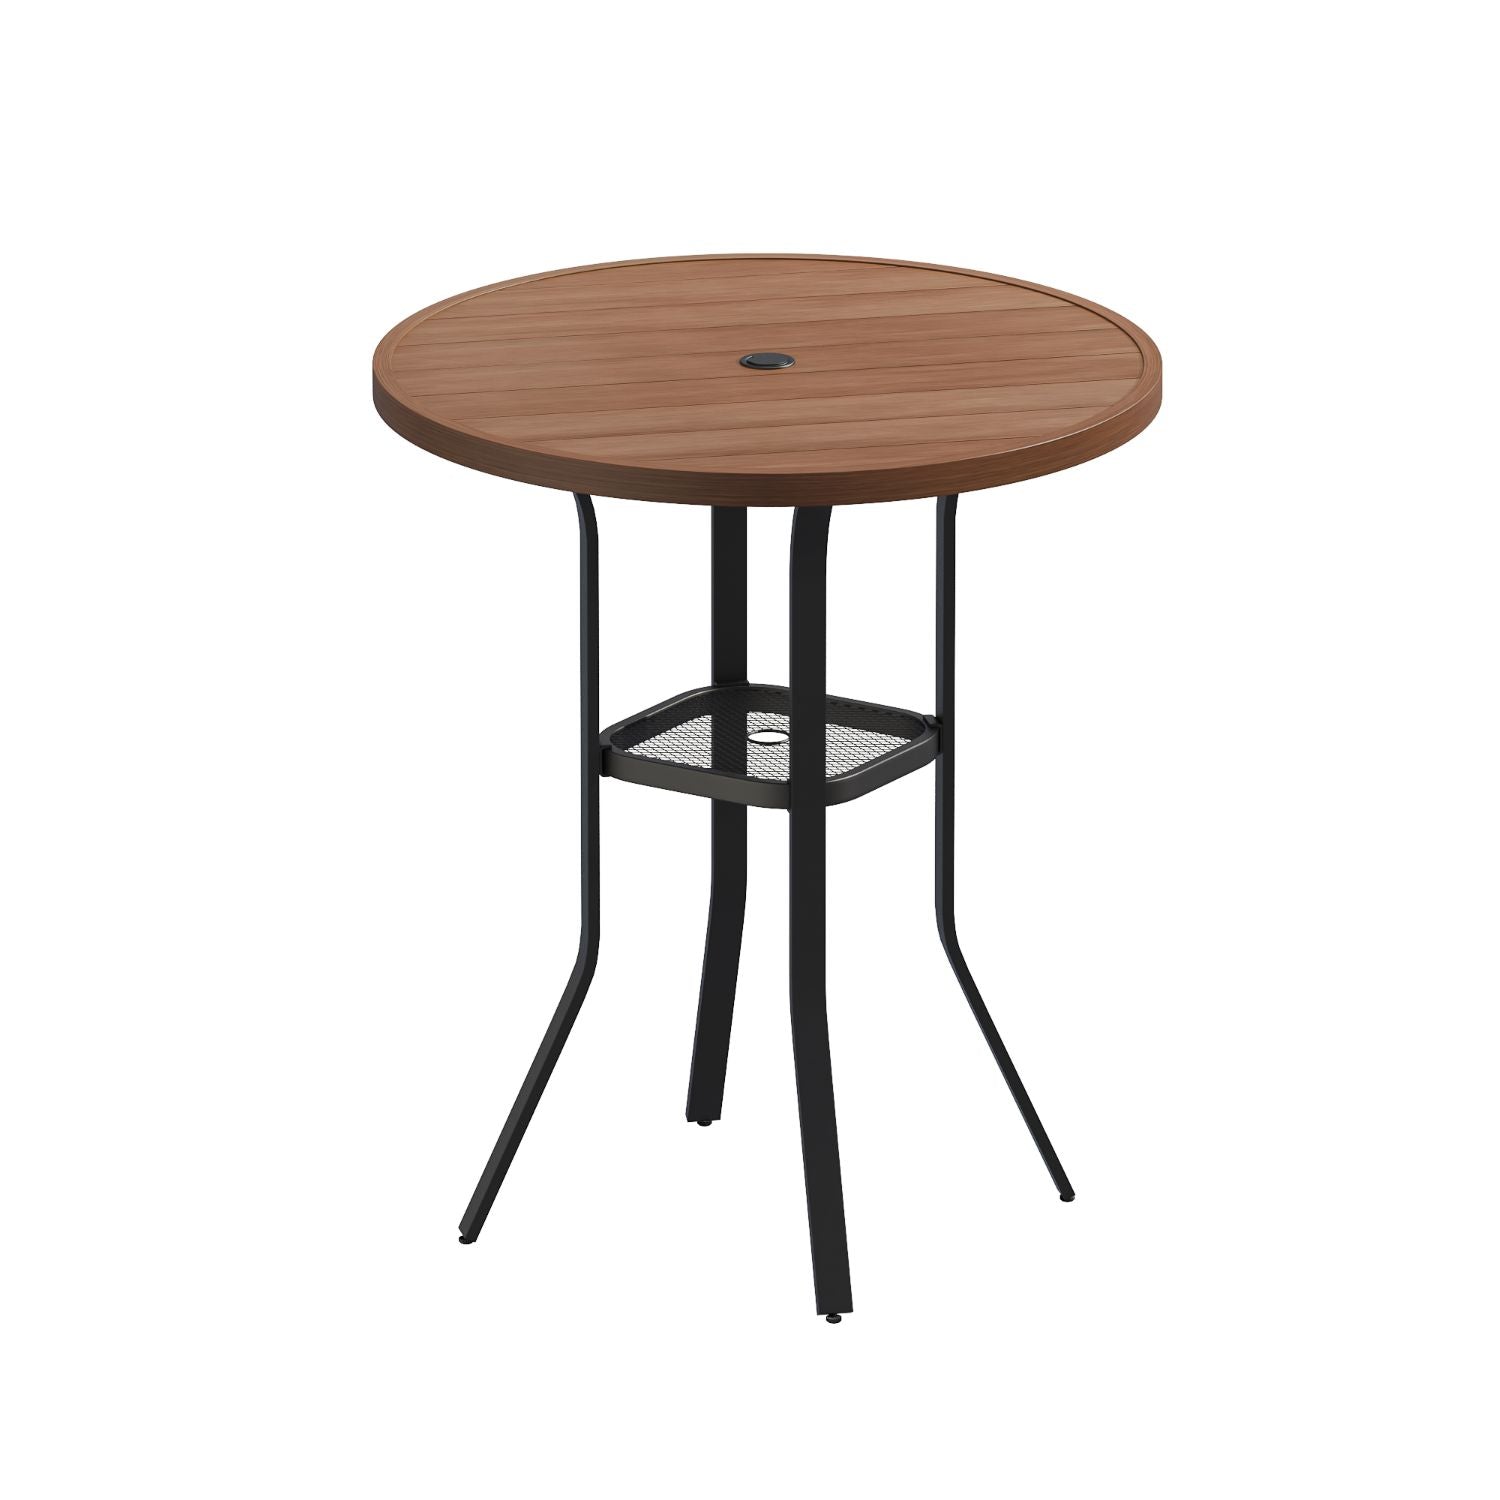 Vicllax Patio 37" Round Bar Table with Umbrella Hole and Storage Shelf